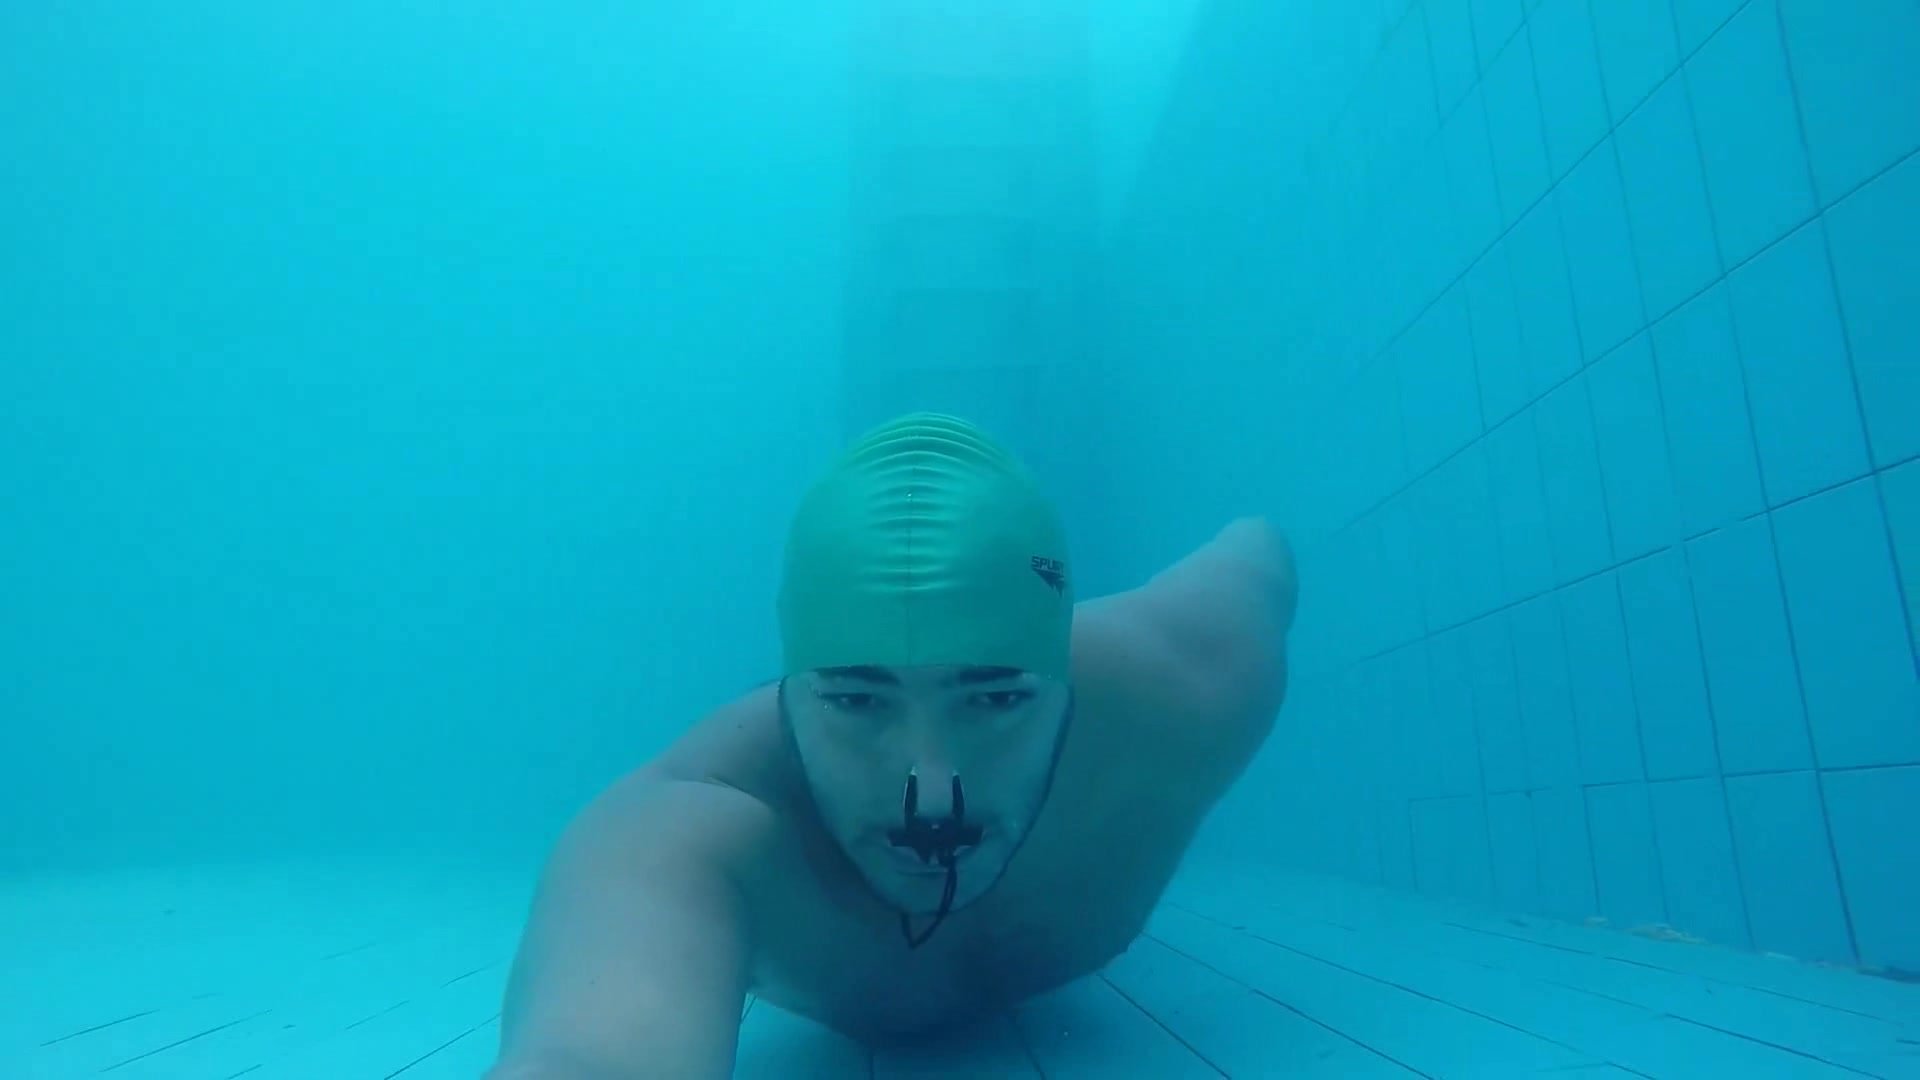 Kareem barefaced underwater with noseclip